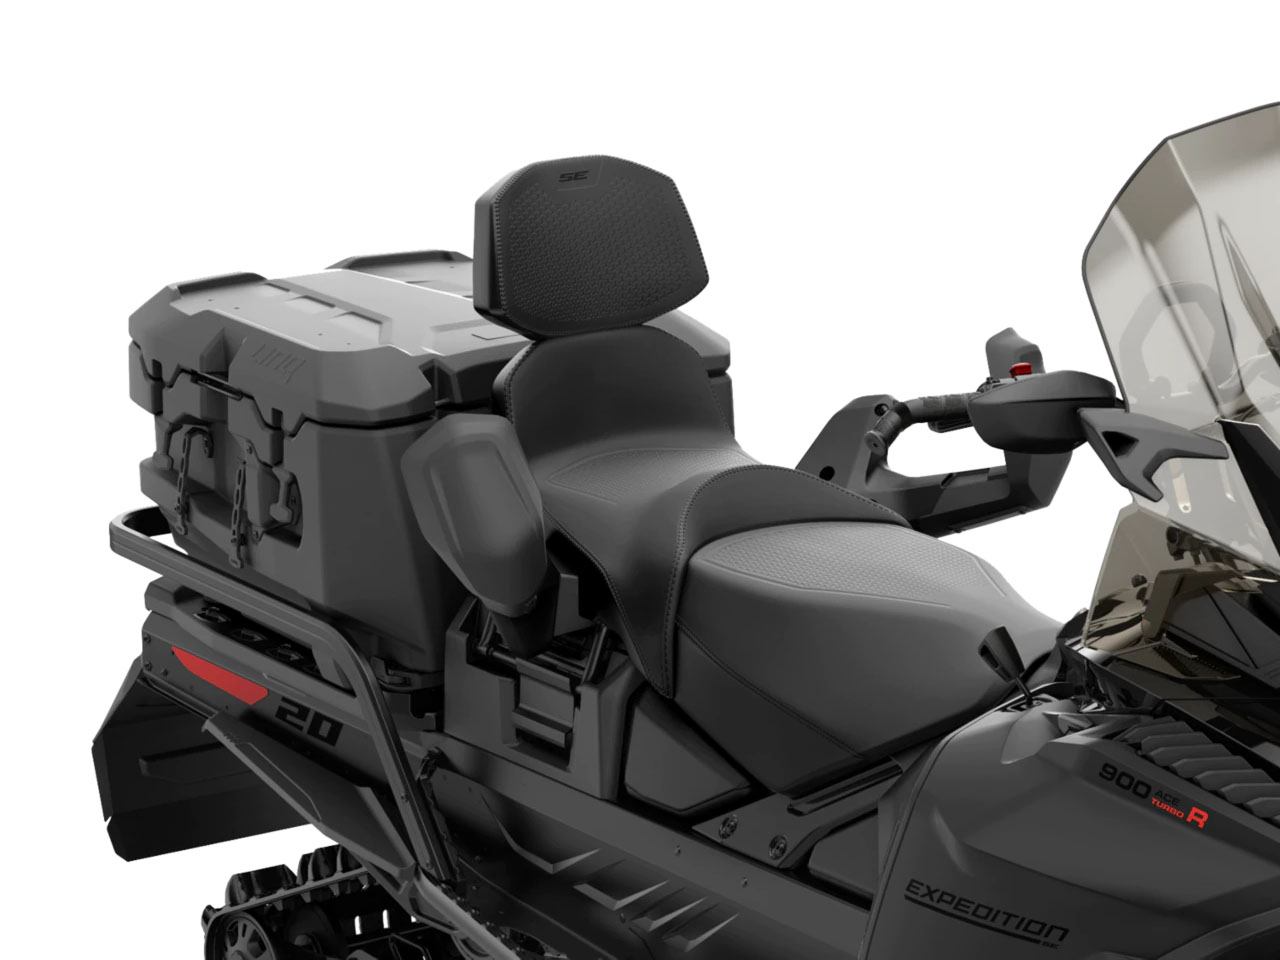 2024 Ski-Doo Expedition Xtreme 900 ACE Turbo R ES Cobra WT 1.8 in Speculator, New York - Photo 7